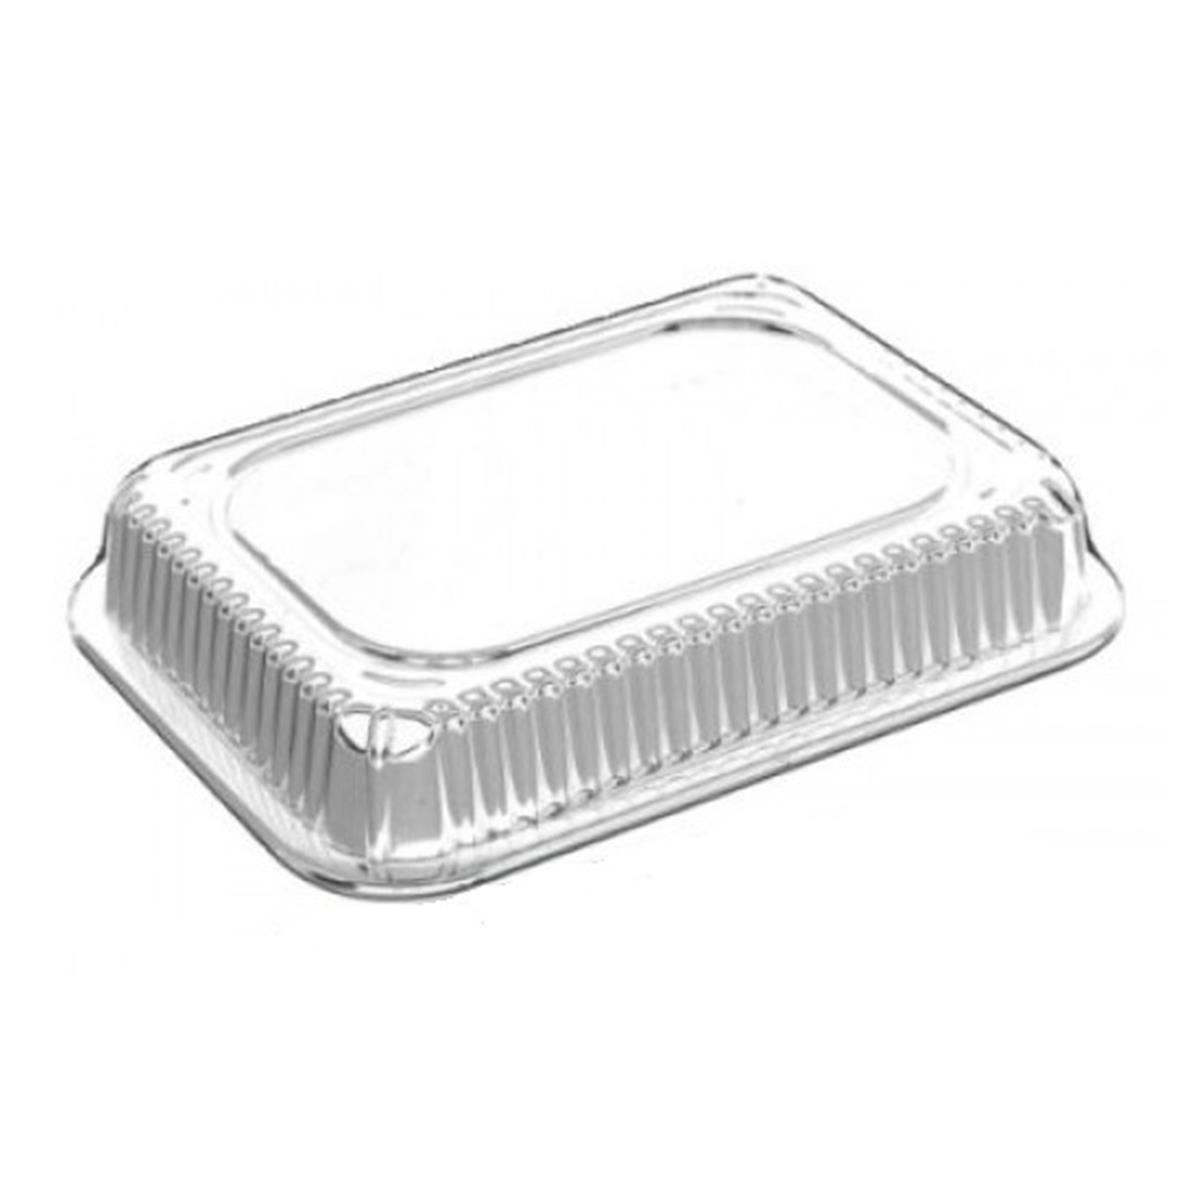 Ld-23 Pec 1 Lbs Oblong Clear Dome Lid - Case Of 1000